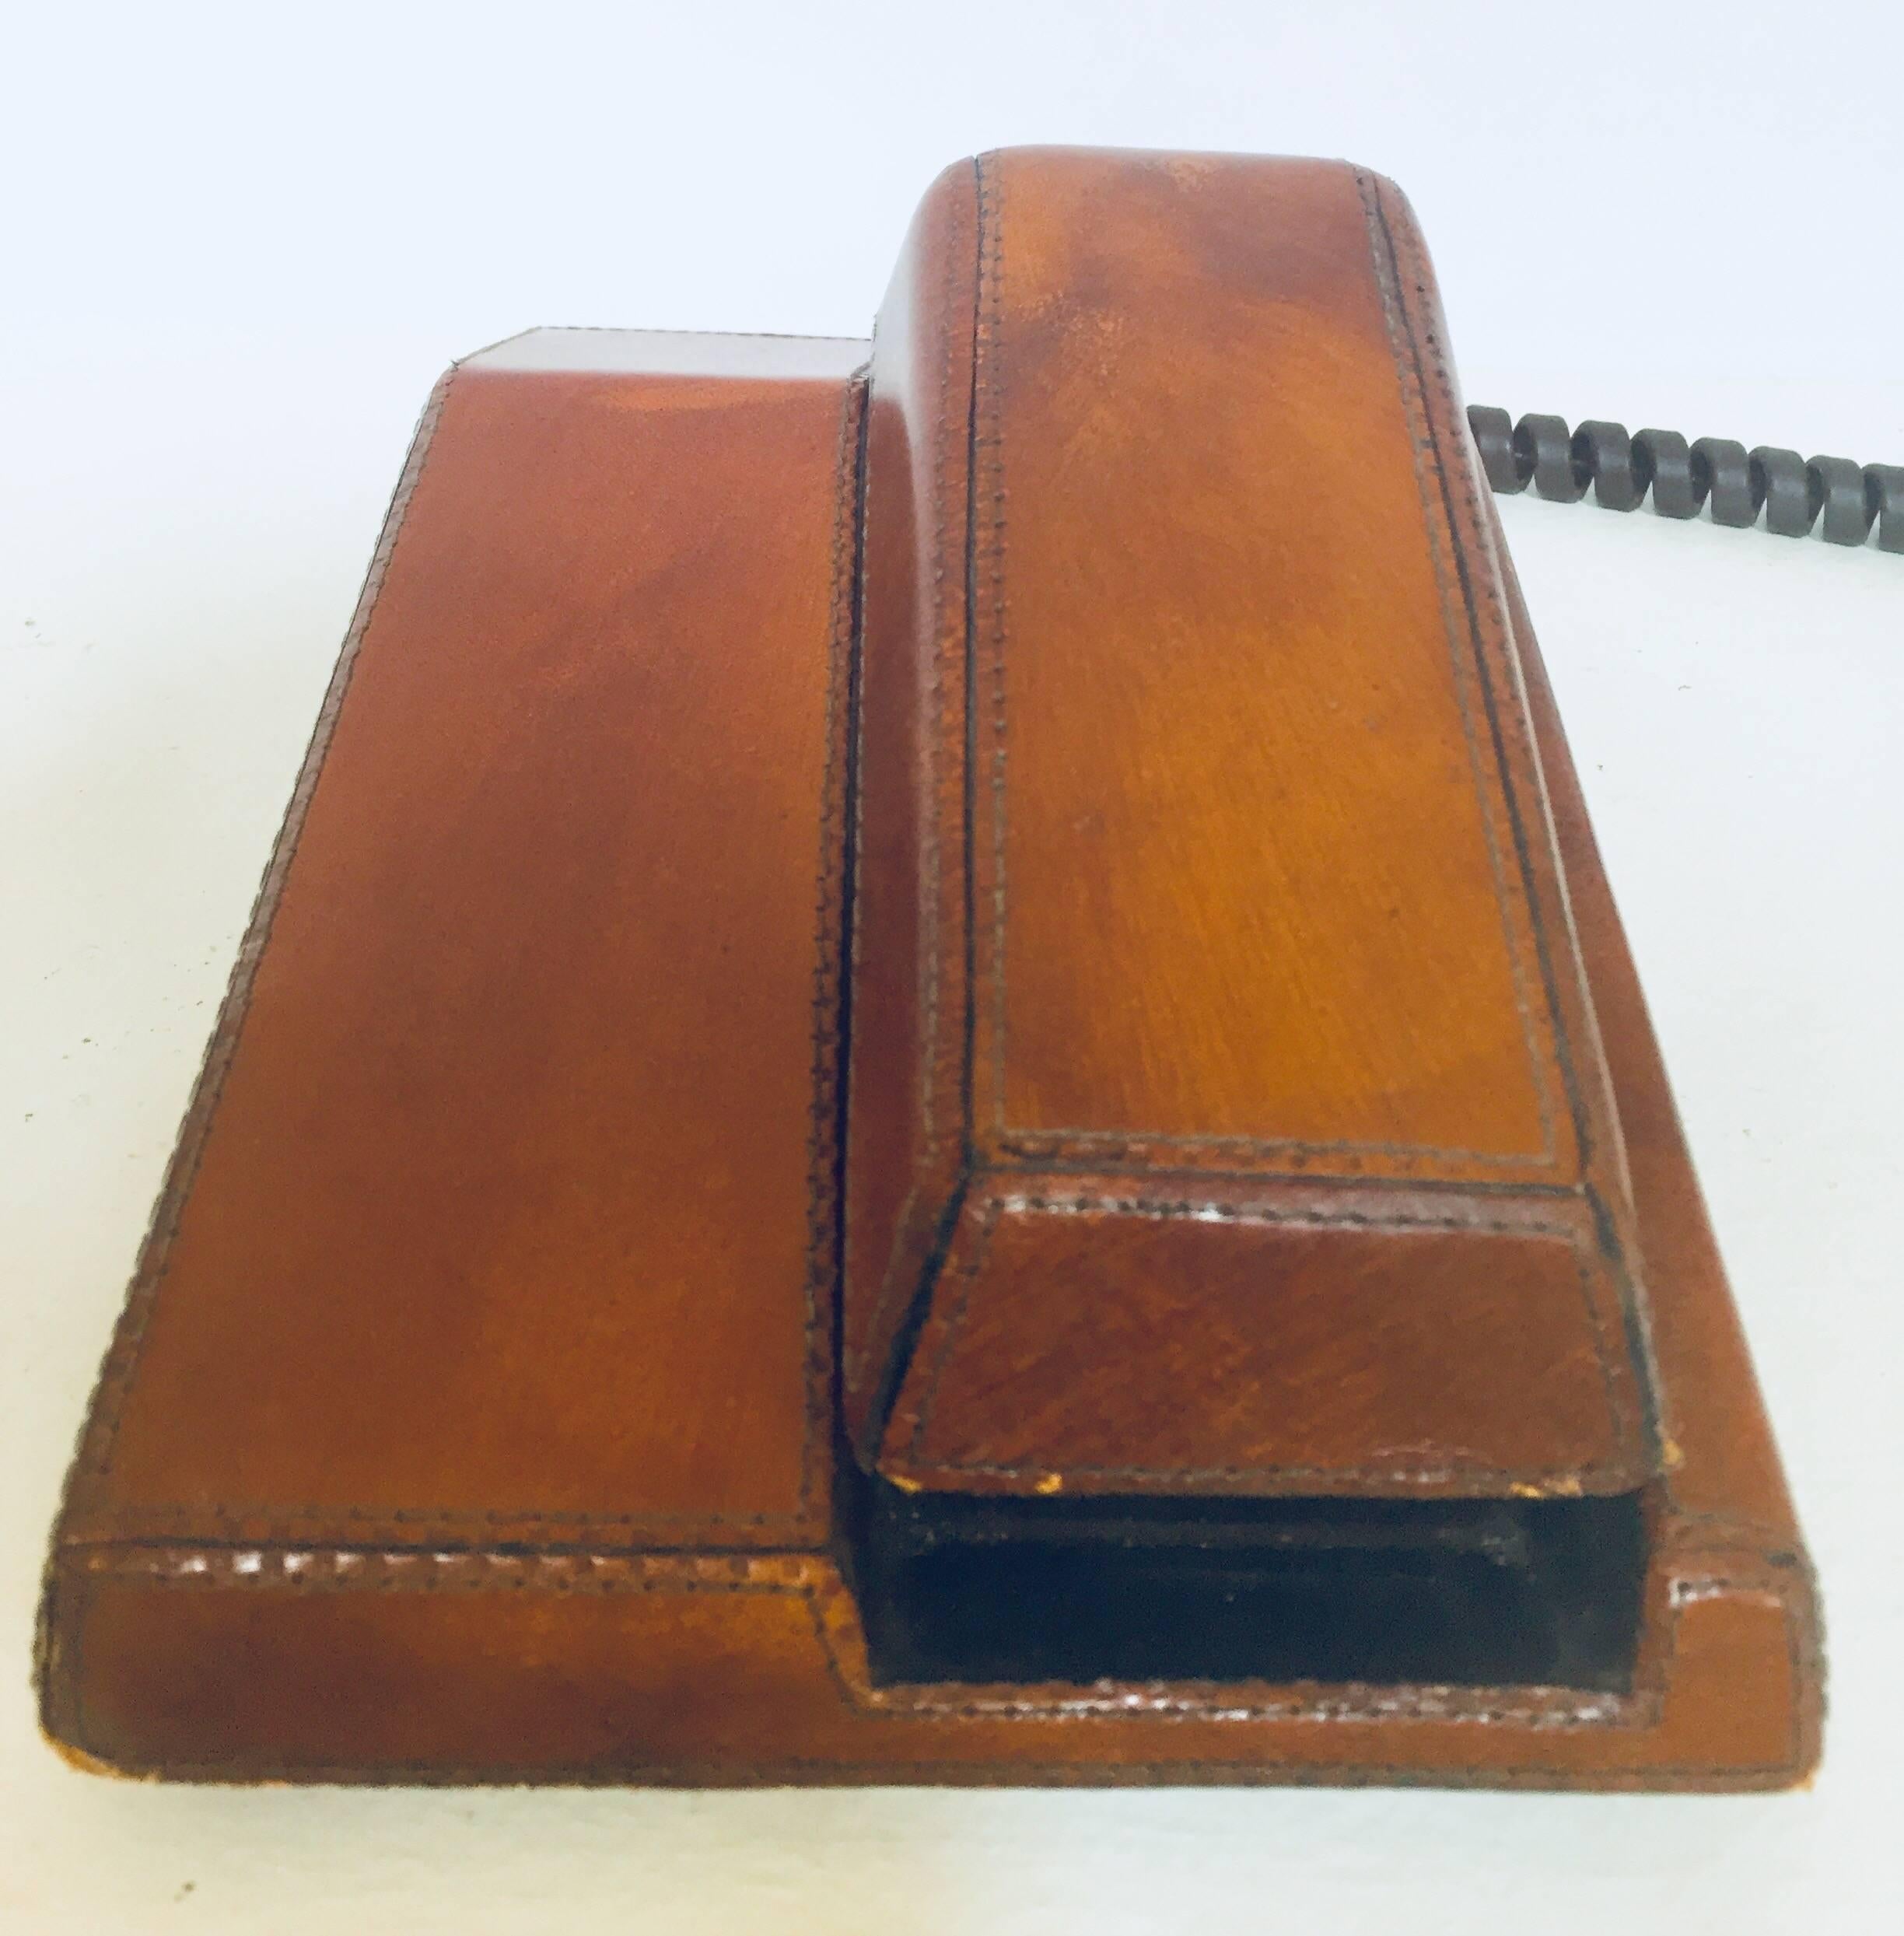 American Vintage Brown Leather Covered and Hand-Stitched Telephone by Contempra, 1970s